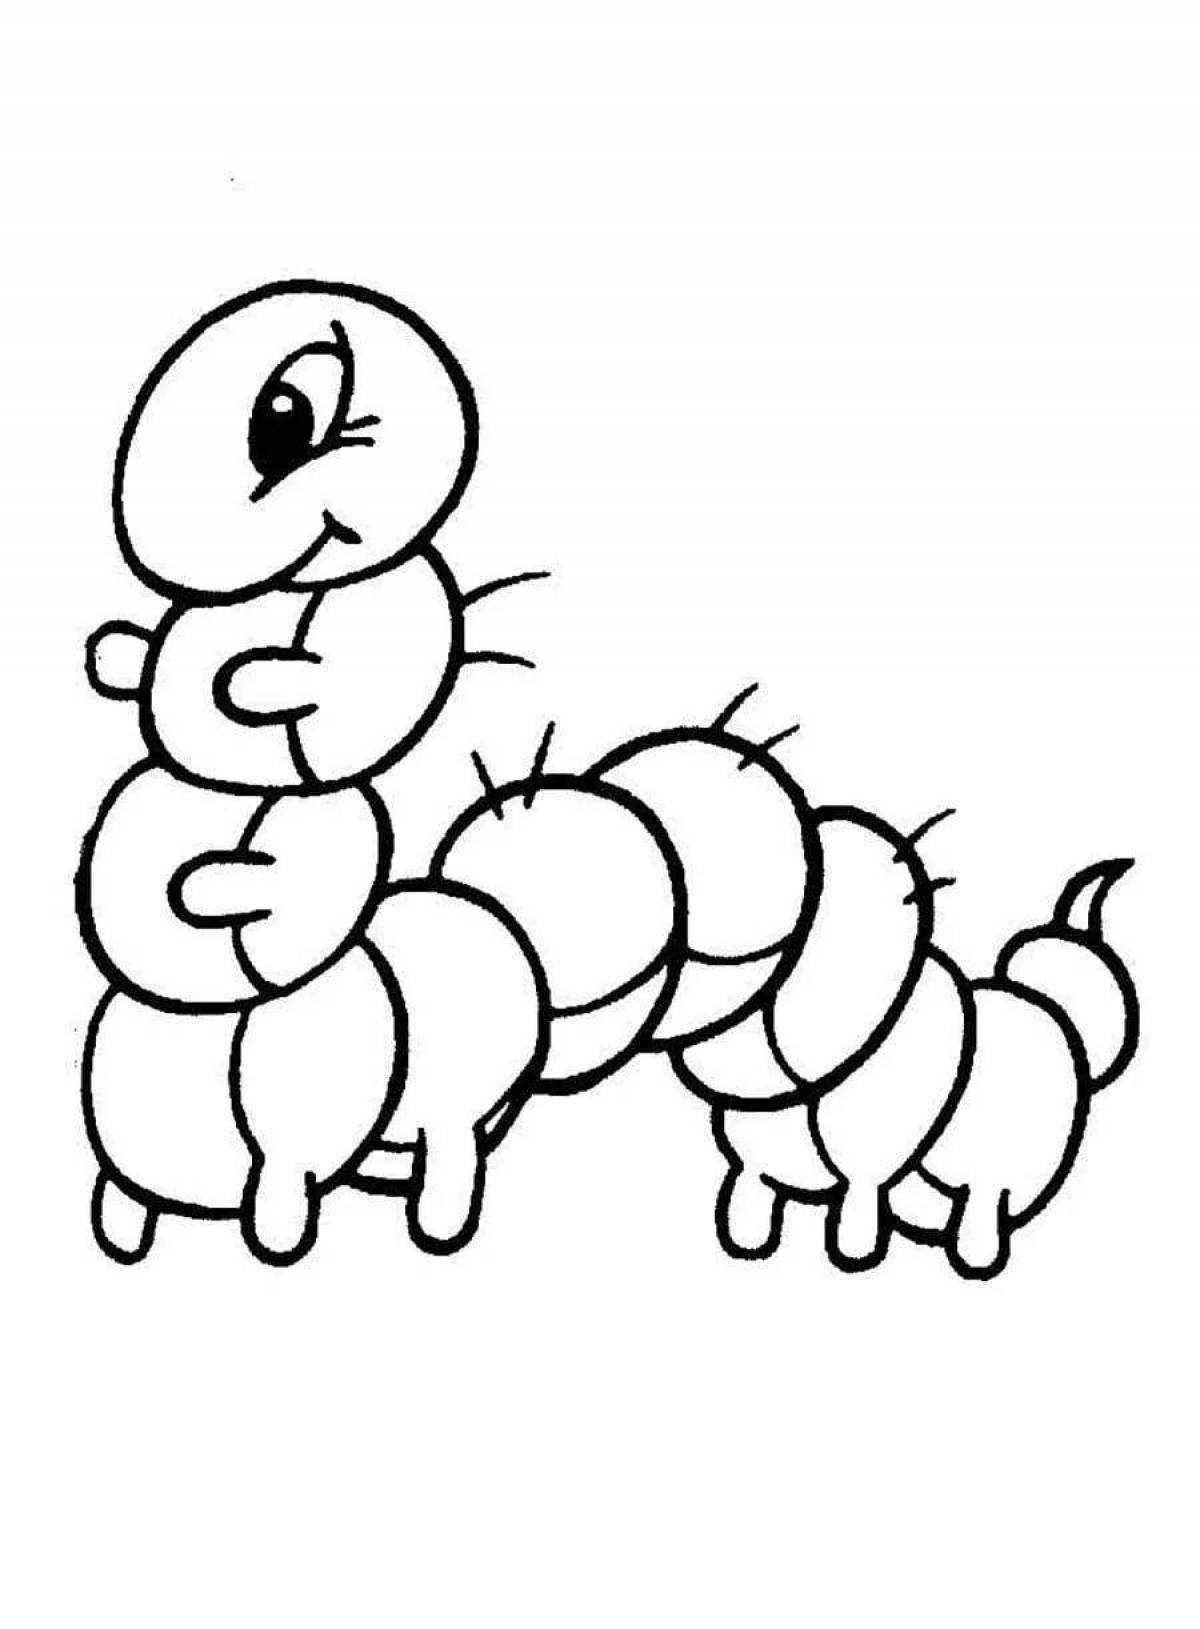 A funny caterpillar coloring book for kids